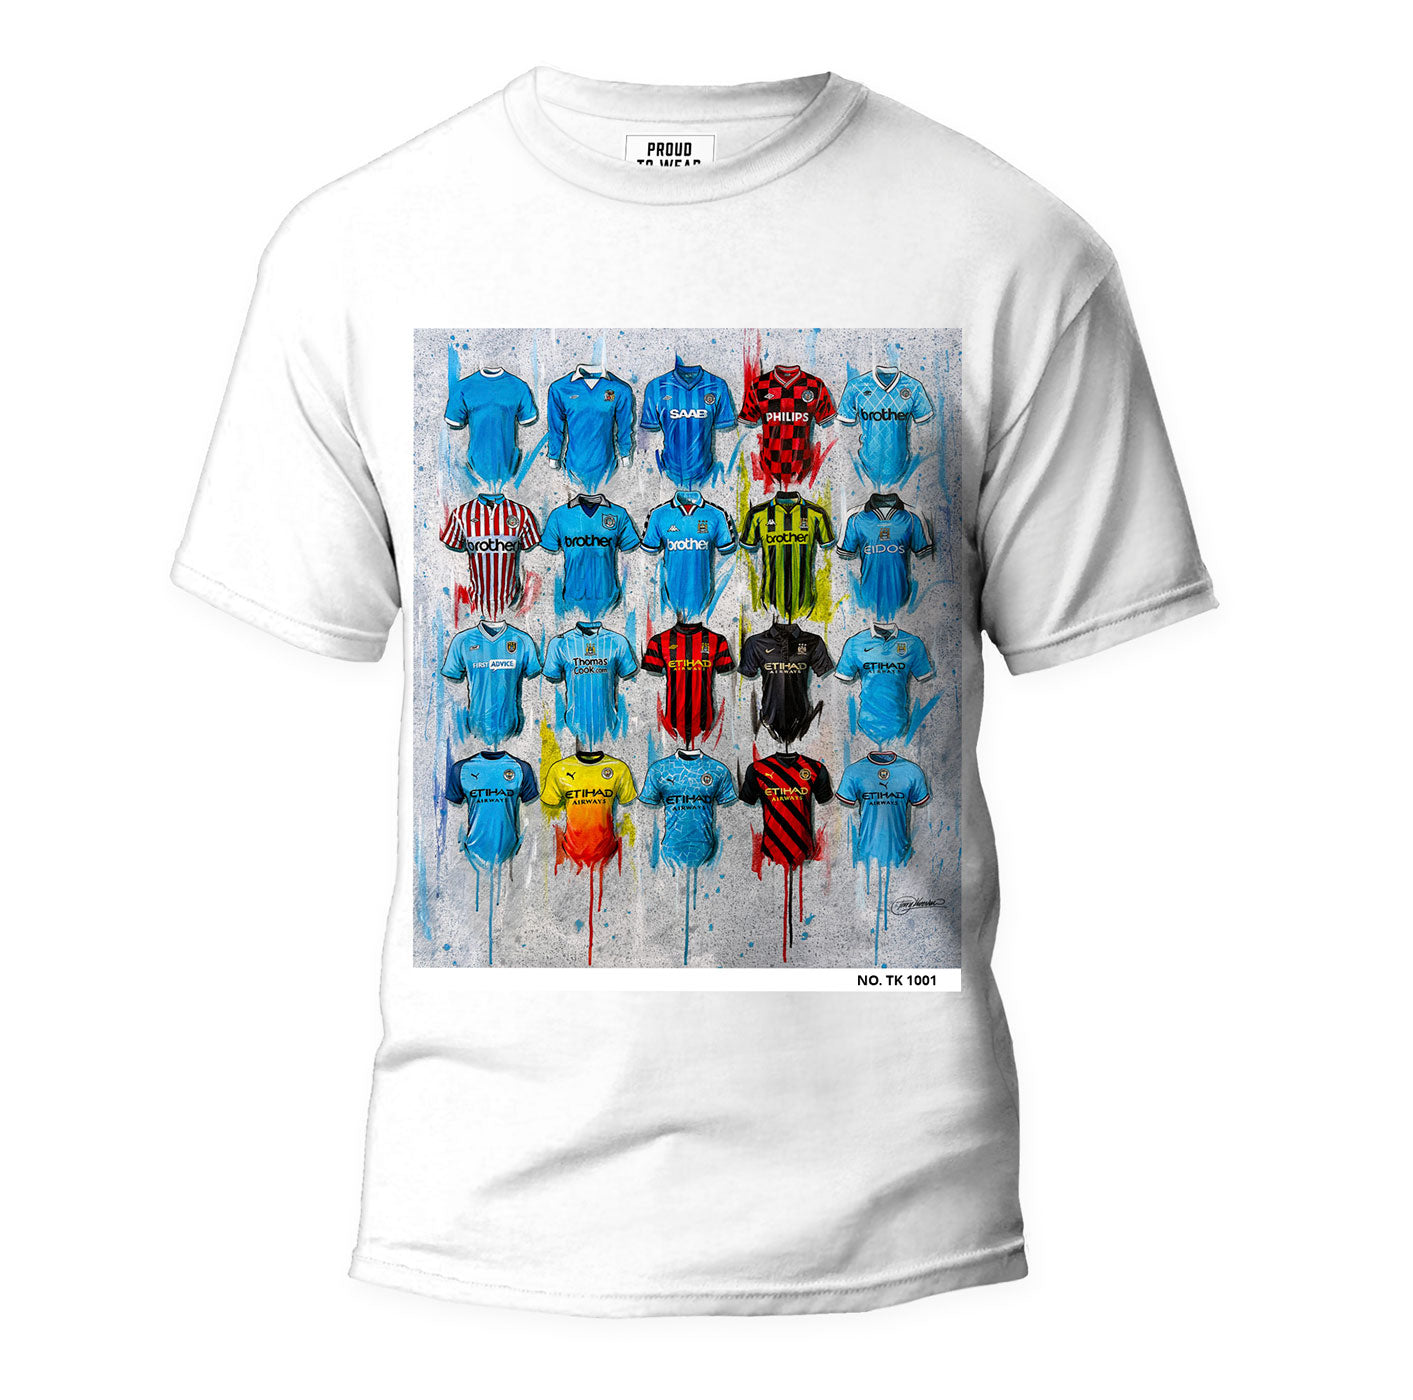 These Man City 2022 T Shirts by Terry Kneeshaw feature his unique artwork for the team and are individually numbered, available in sizes xxs - xxxl, and come in black or white. The T Shirts are perfect for any fan of the club and make a stylish addition to any wardrobe. Show your support for the team with these one-off designs that celebrate Man City's latest successes on the pitch.